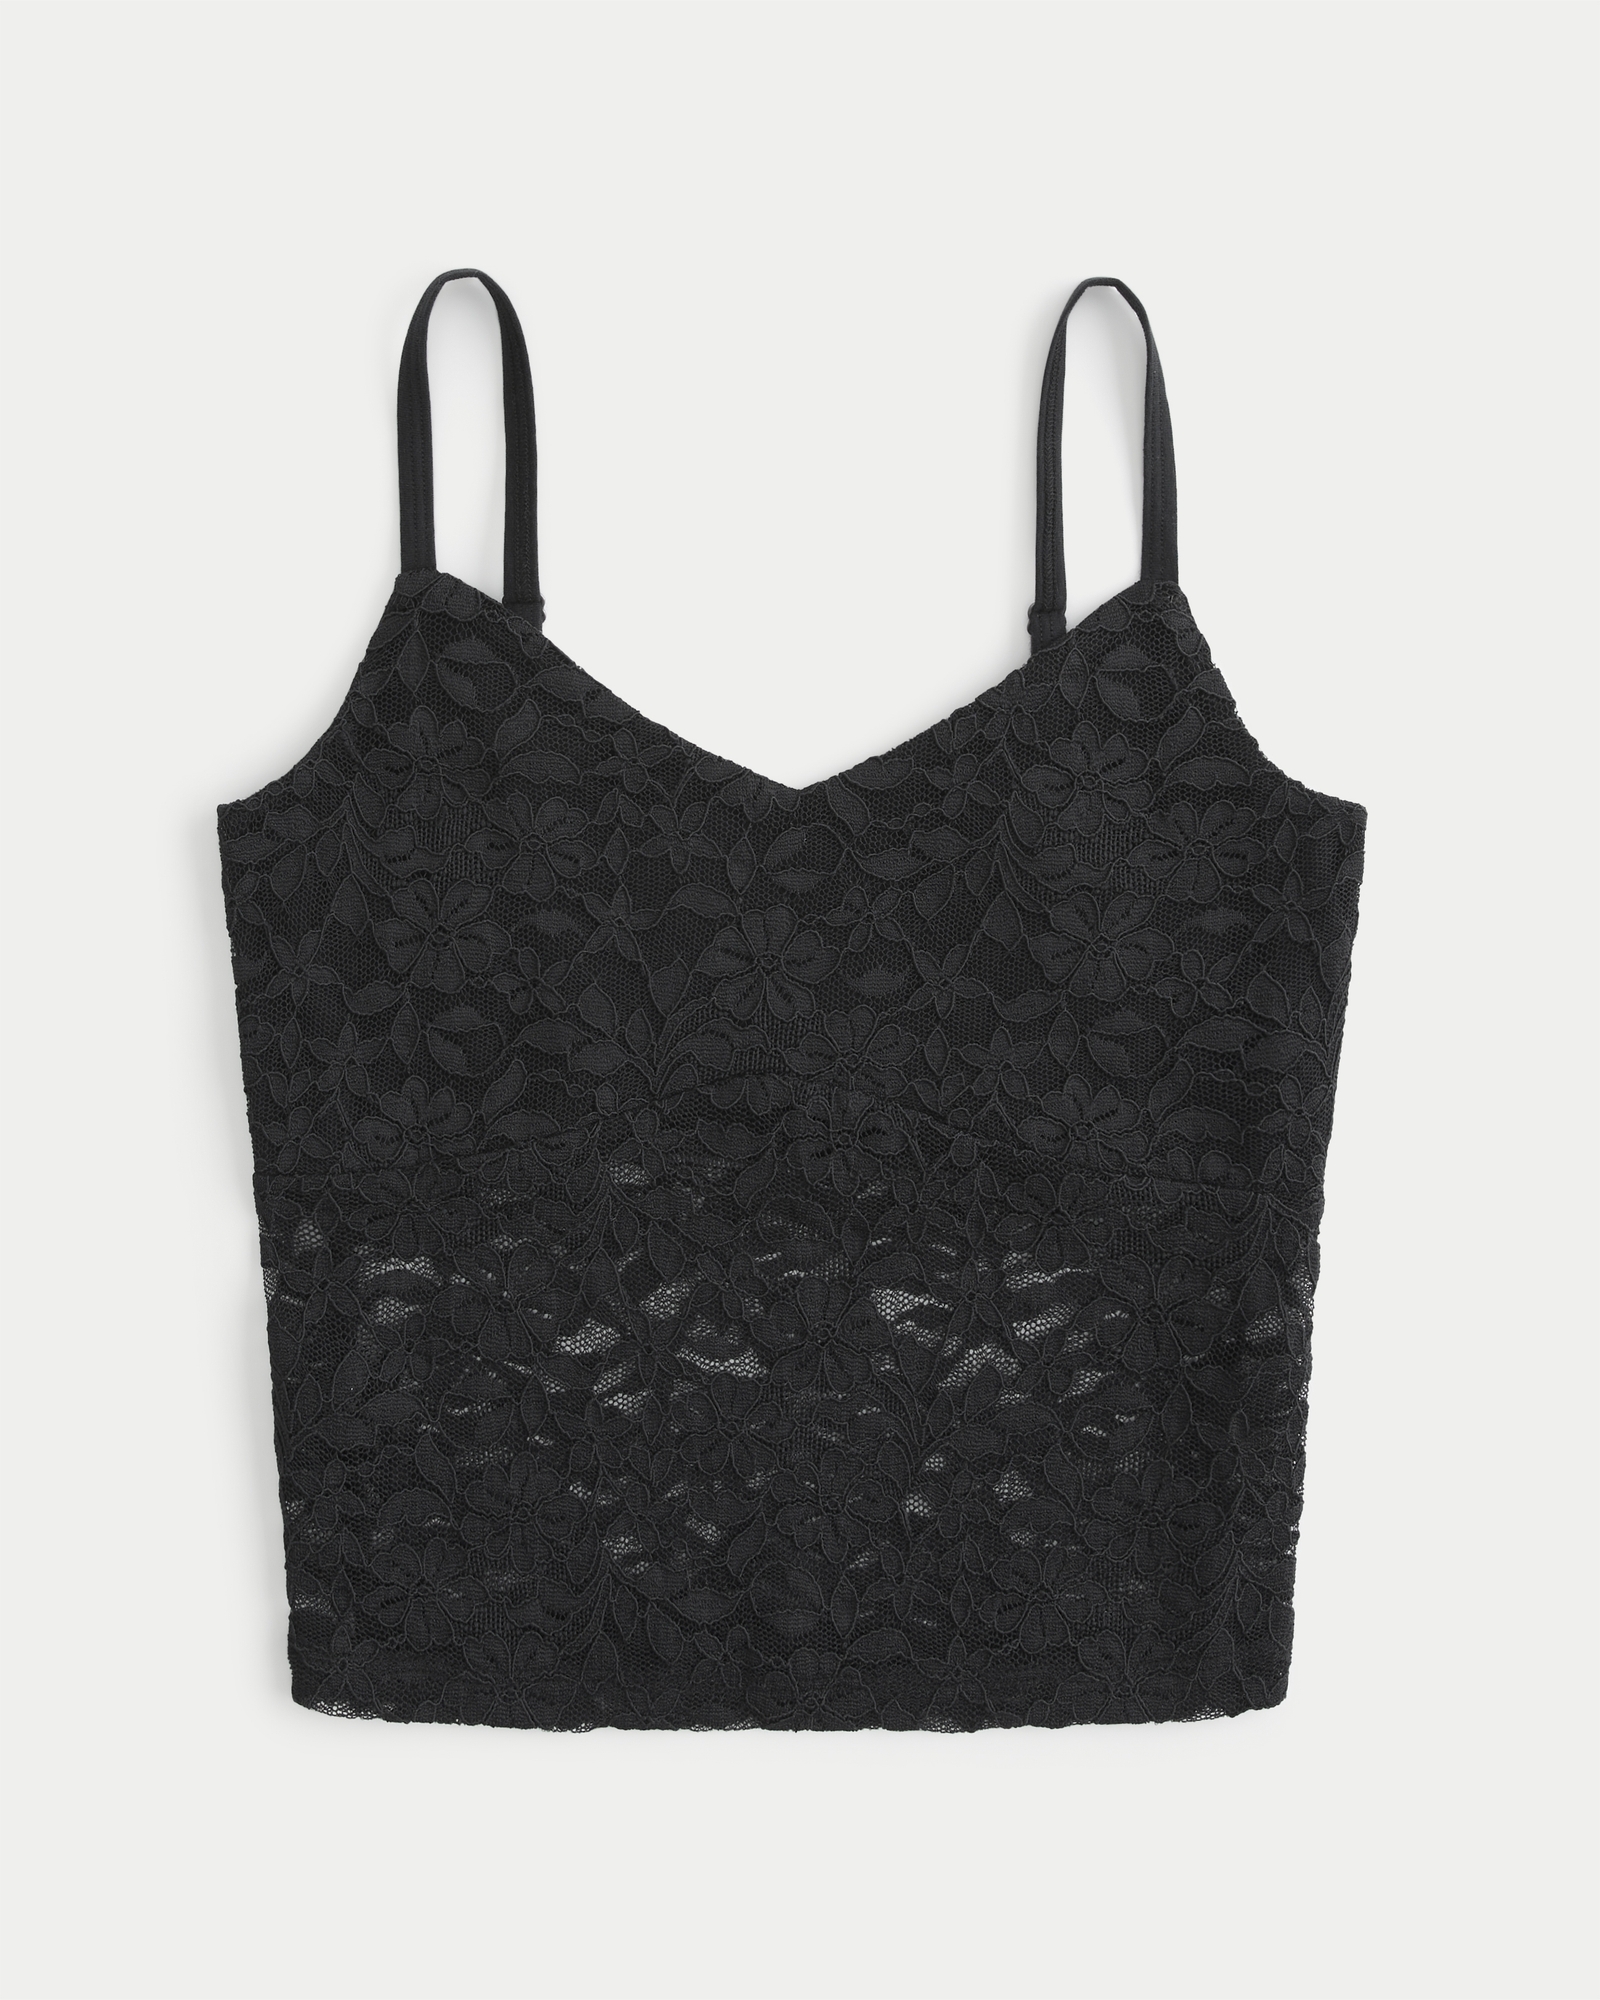 Women's All-Over Lace Cami, Women's Clearance